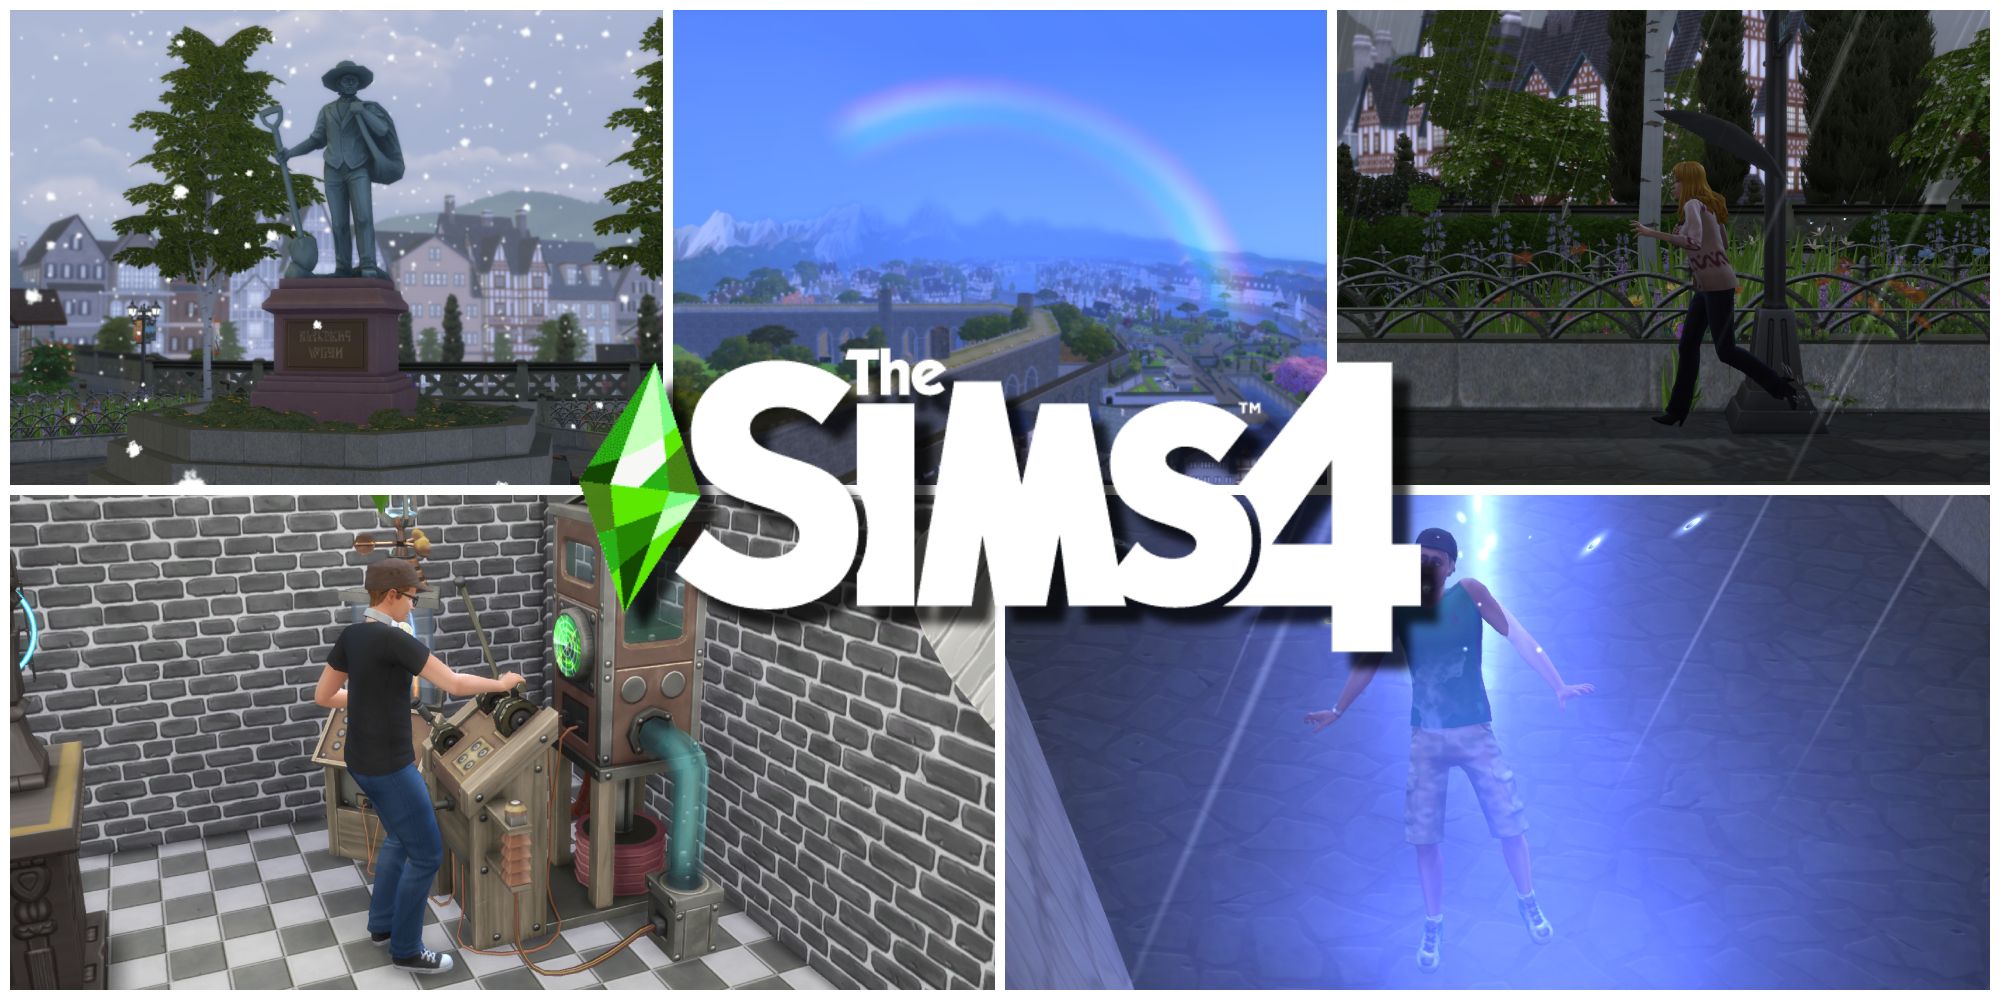 A collage of several photos of weather and how to control it in The Sims 4